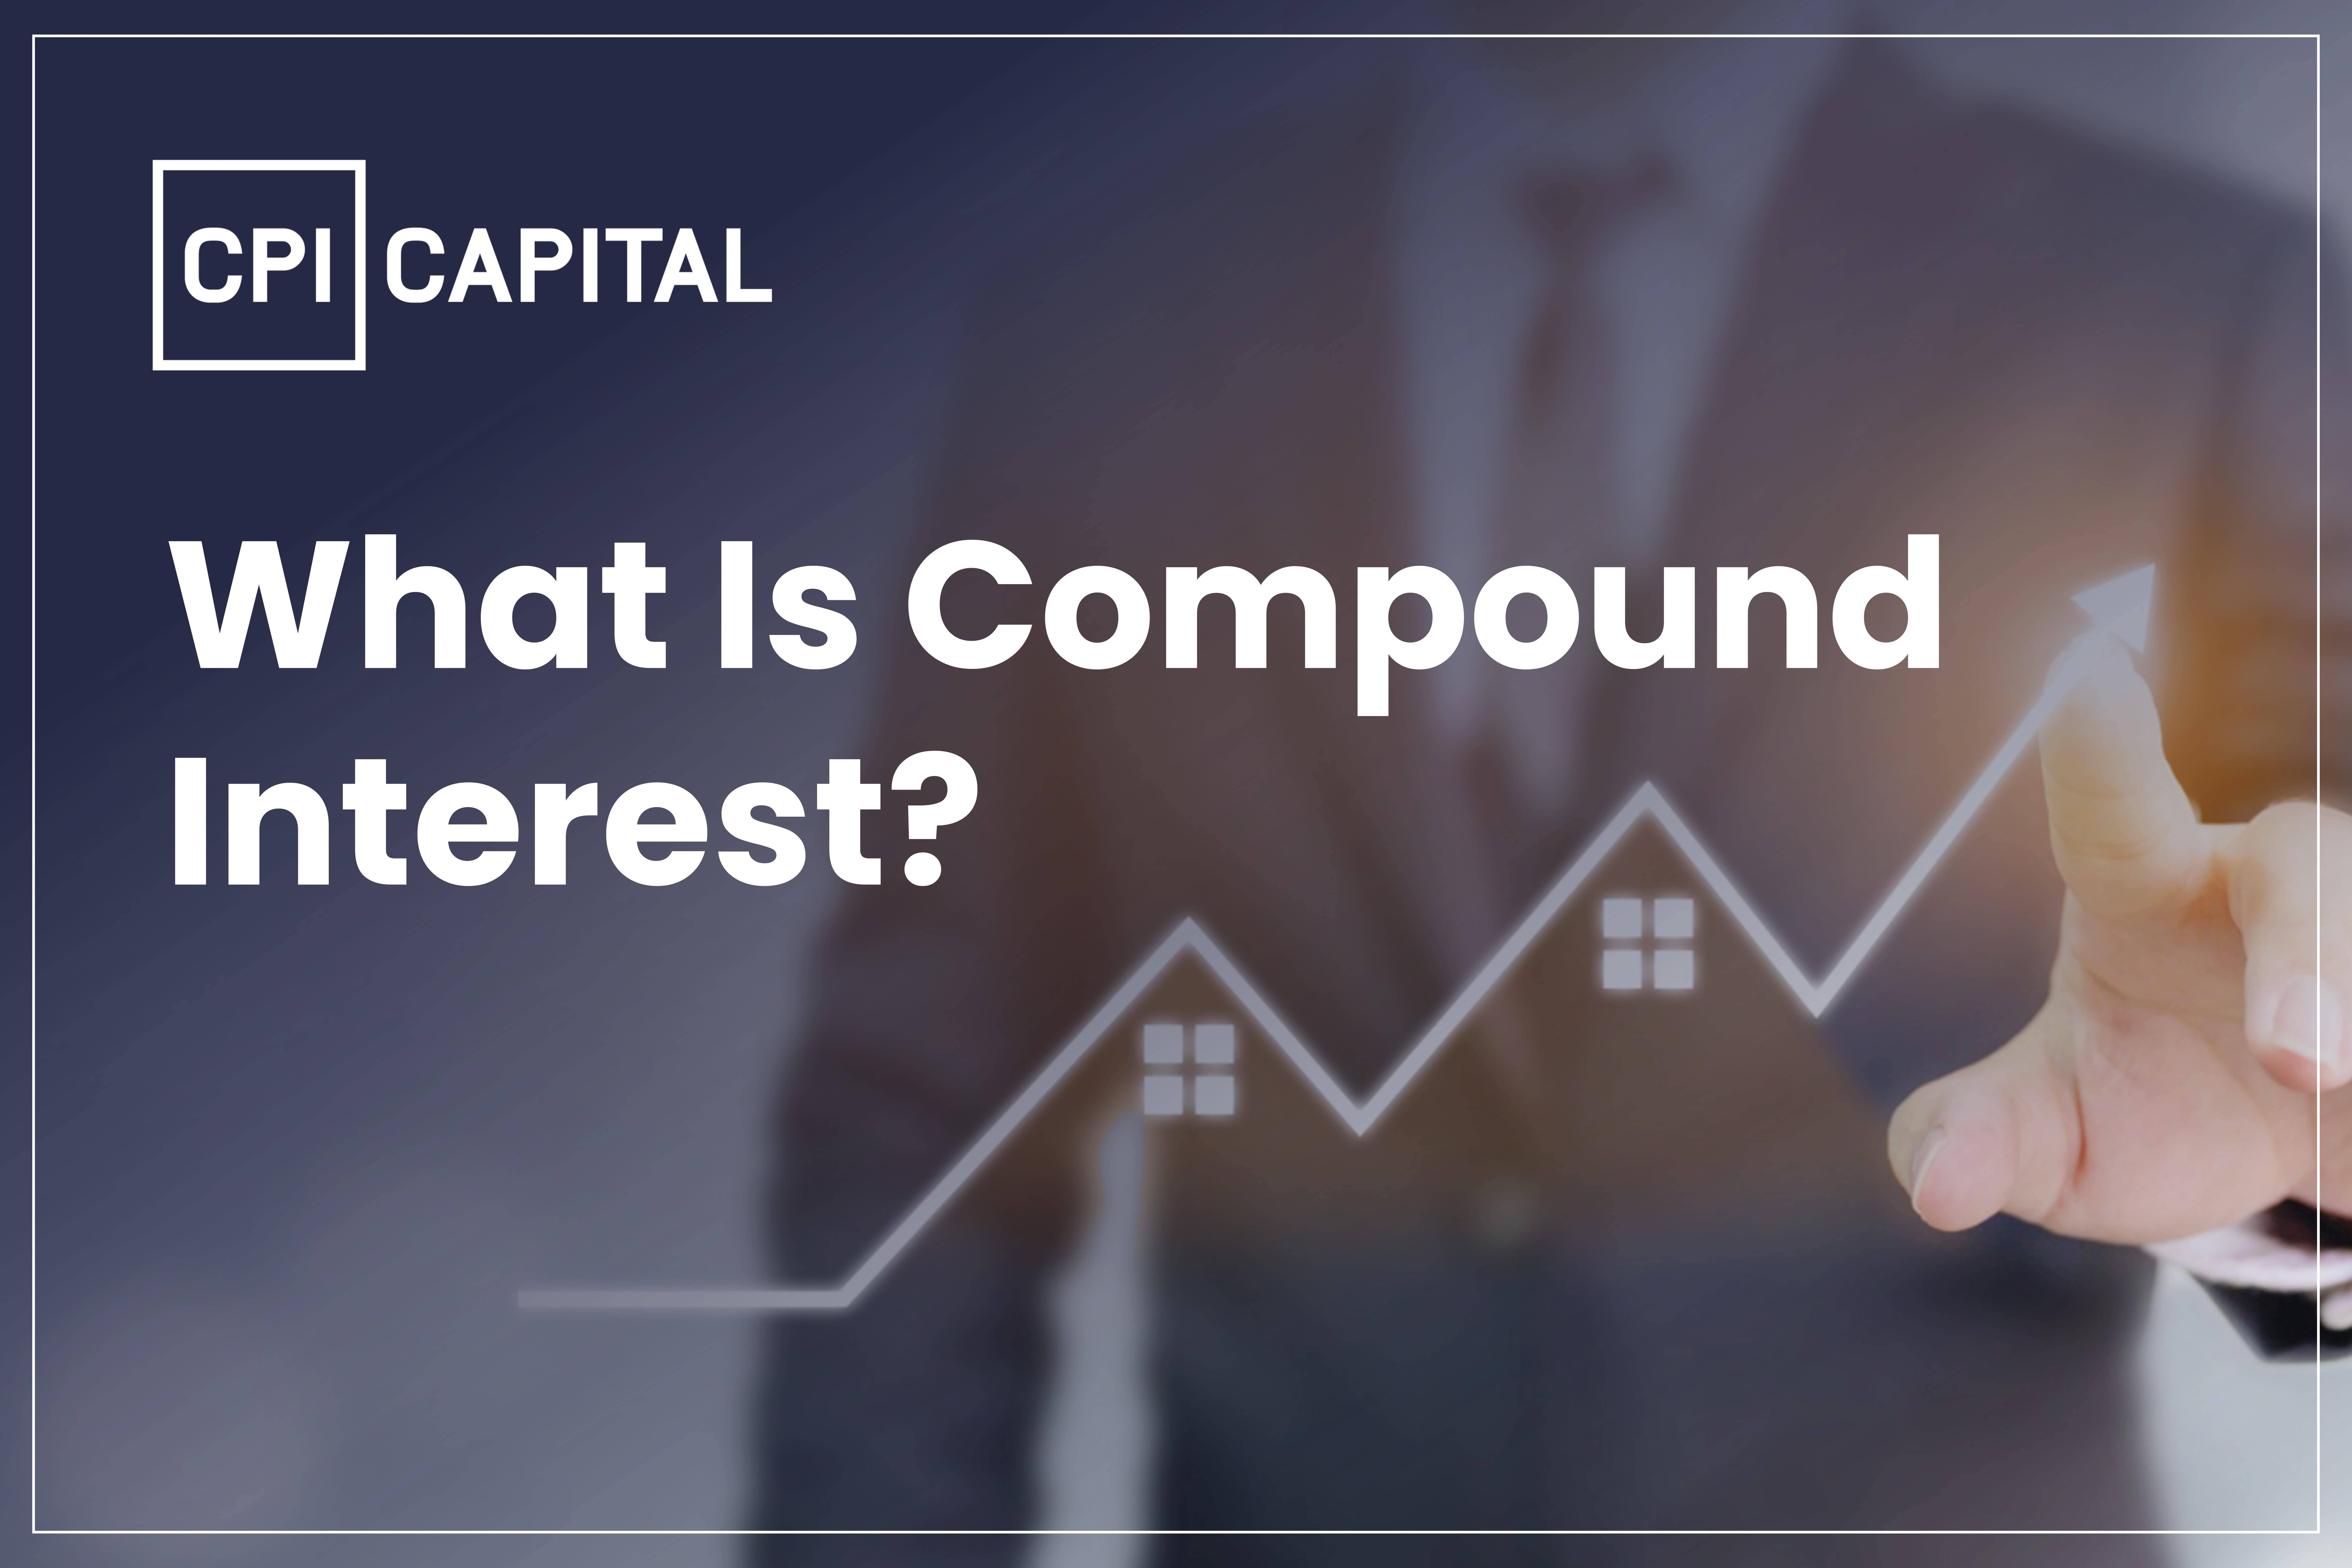 What Is Compound Interest?